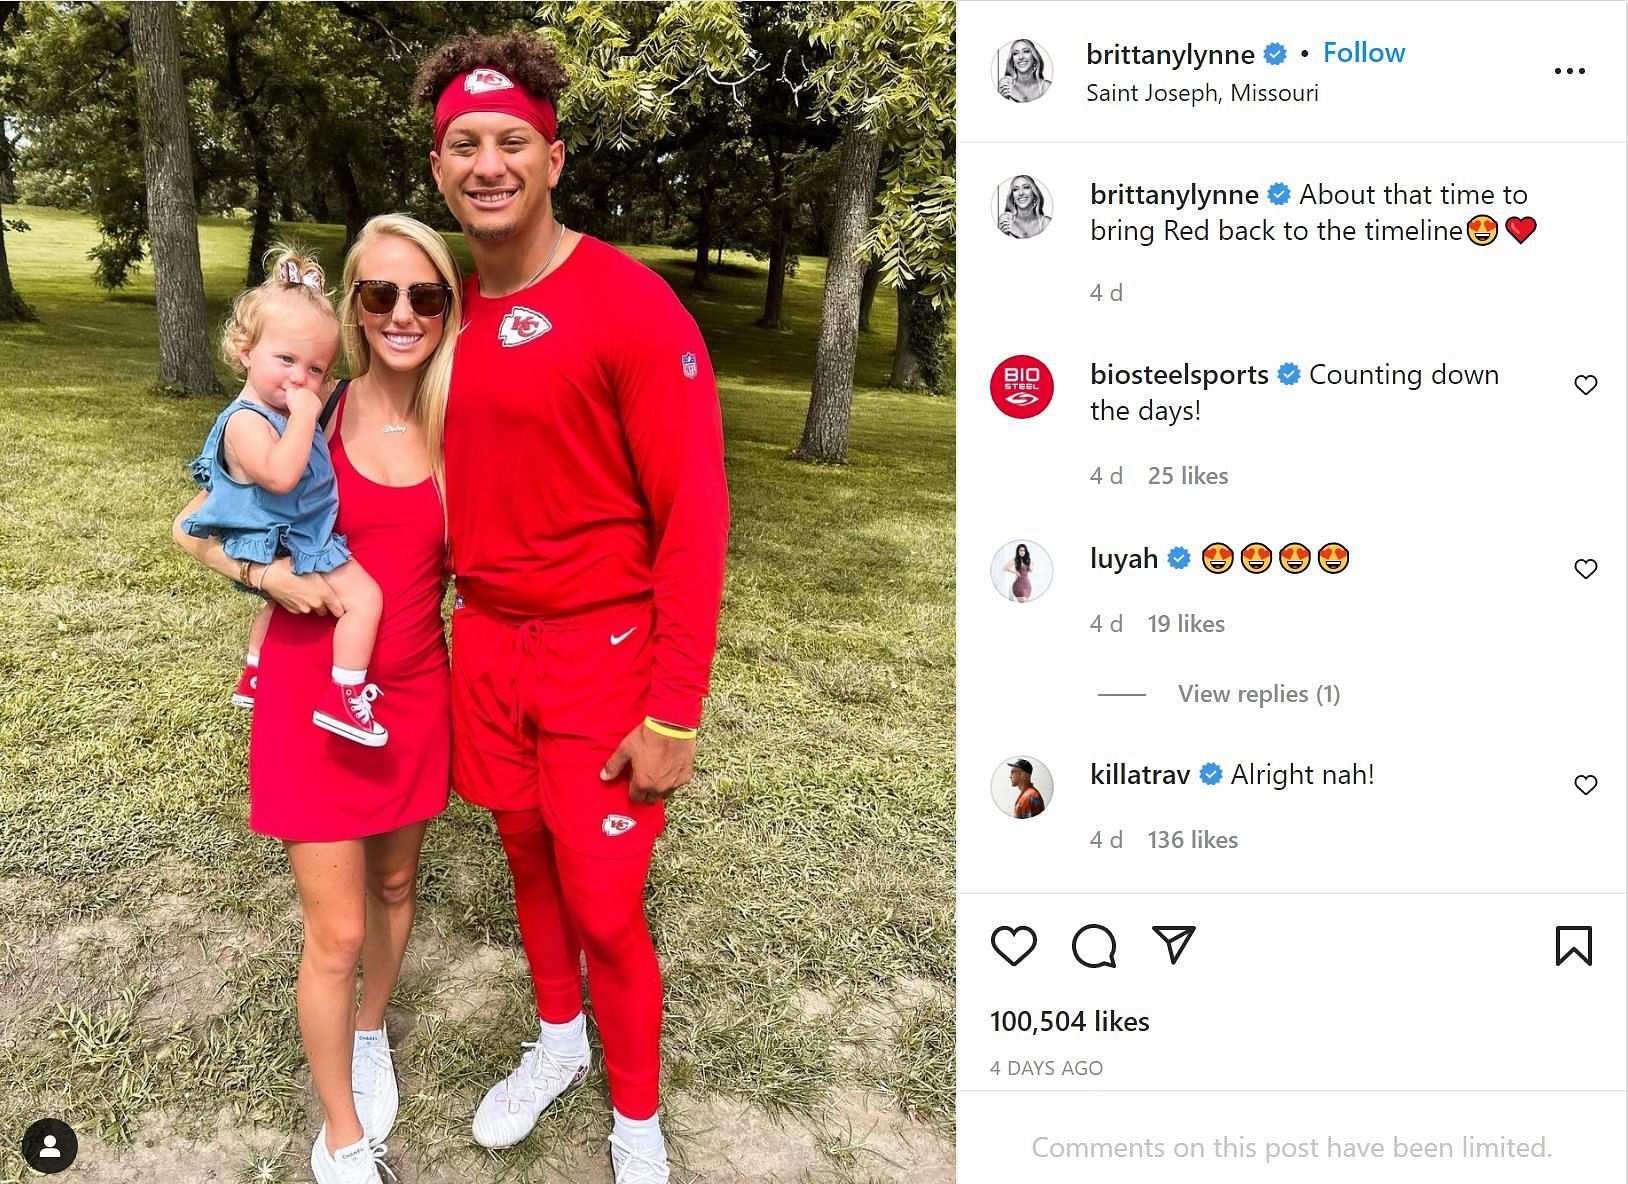 Patrick Mahomes Jumps into Pool After He & Brittany Matthews